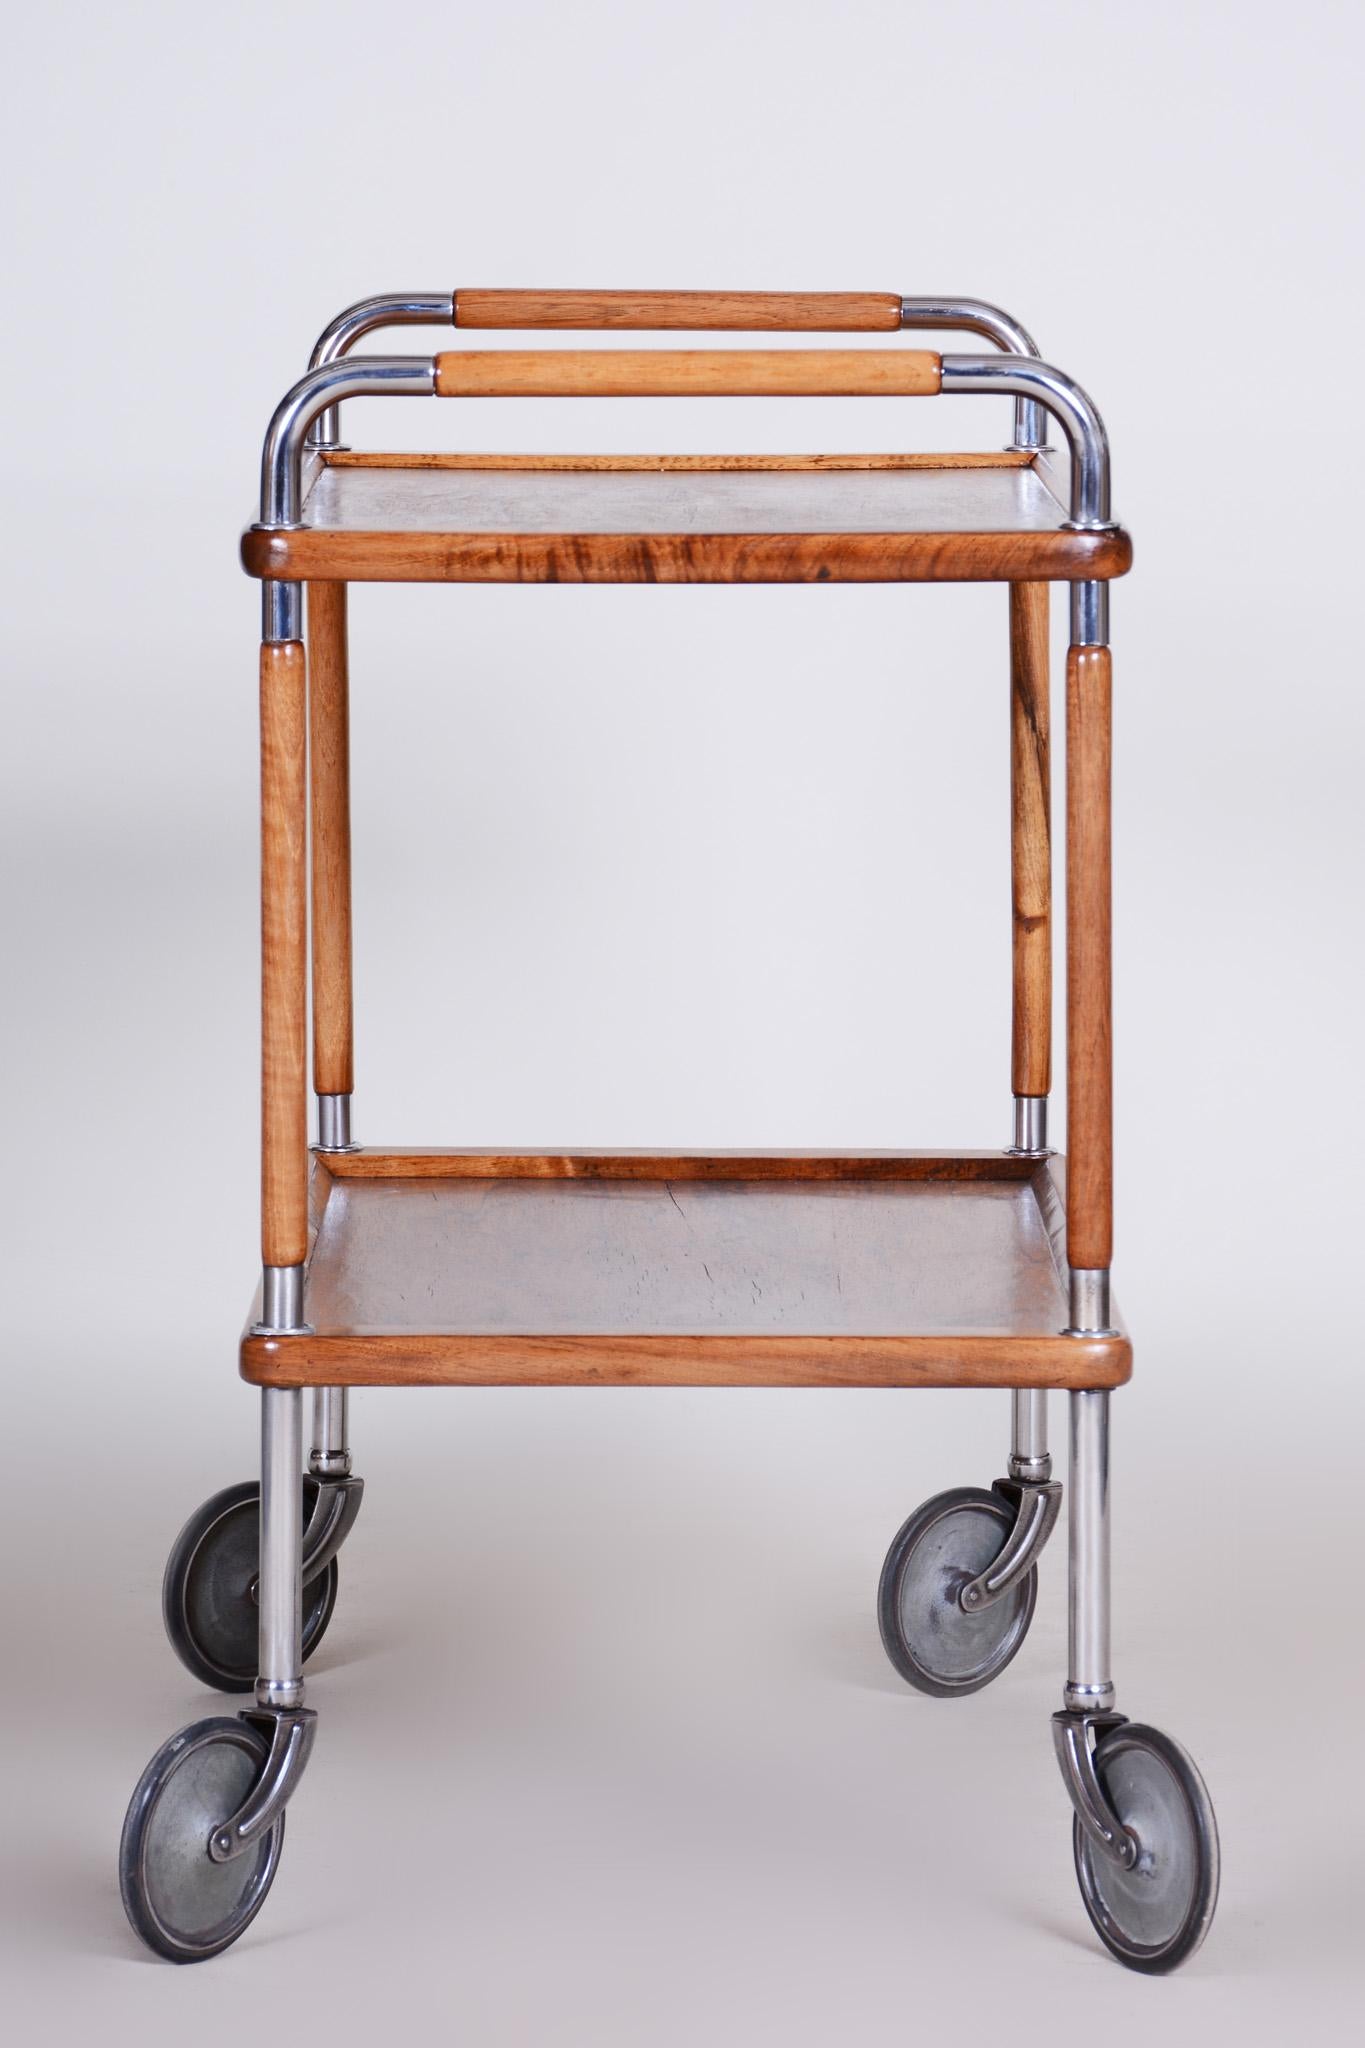 Restored Art Deco Serving Trolley Made in the 1930s by Thonet, Walnut and Steel For Sale 7